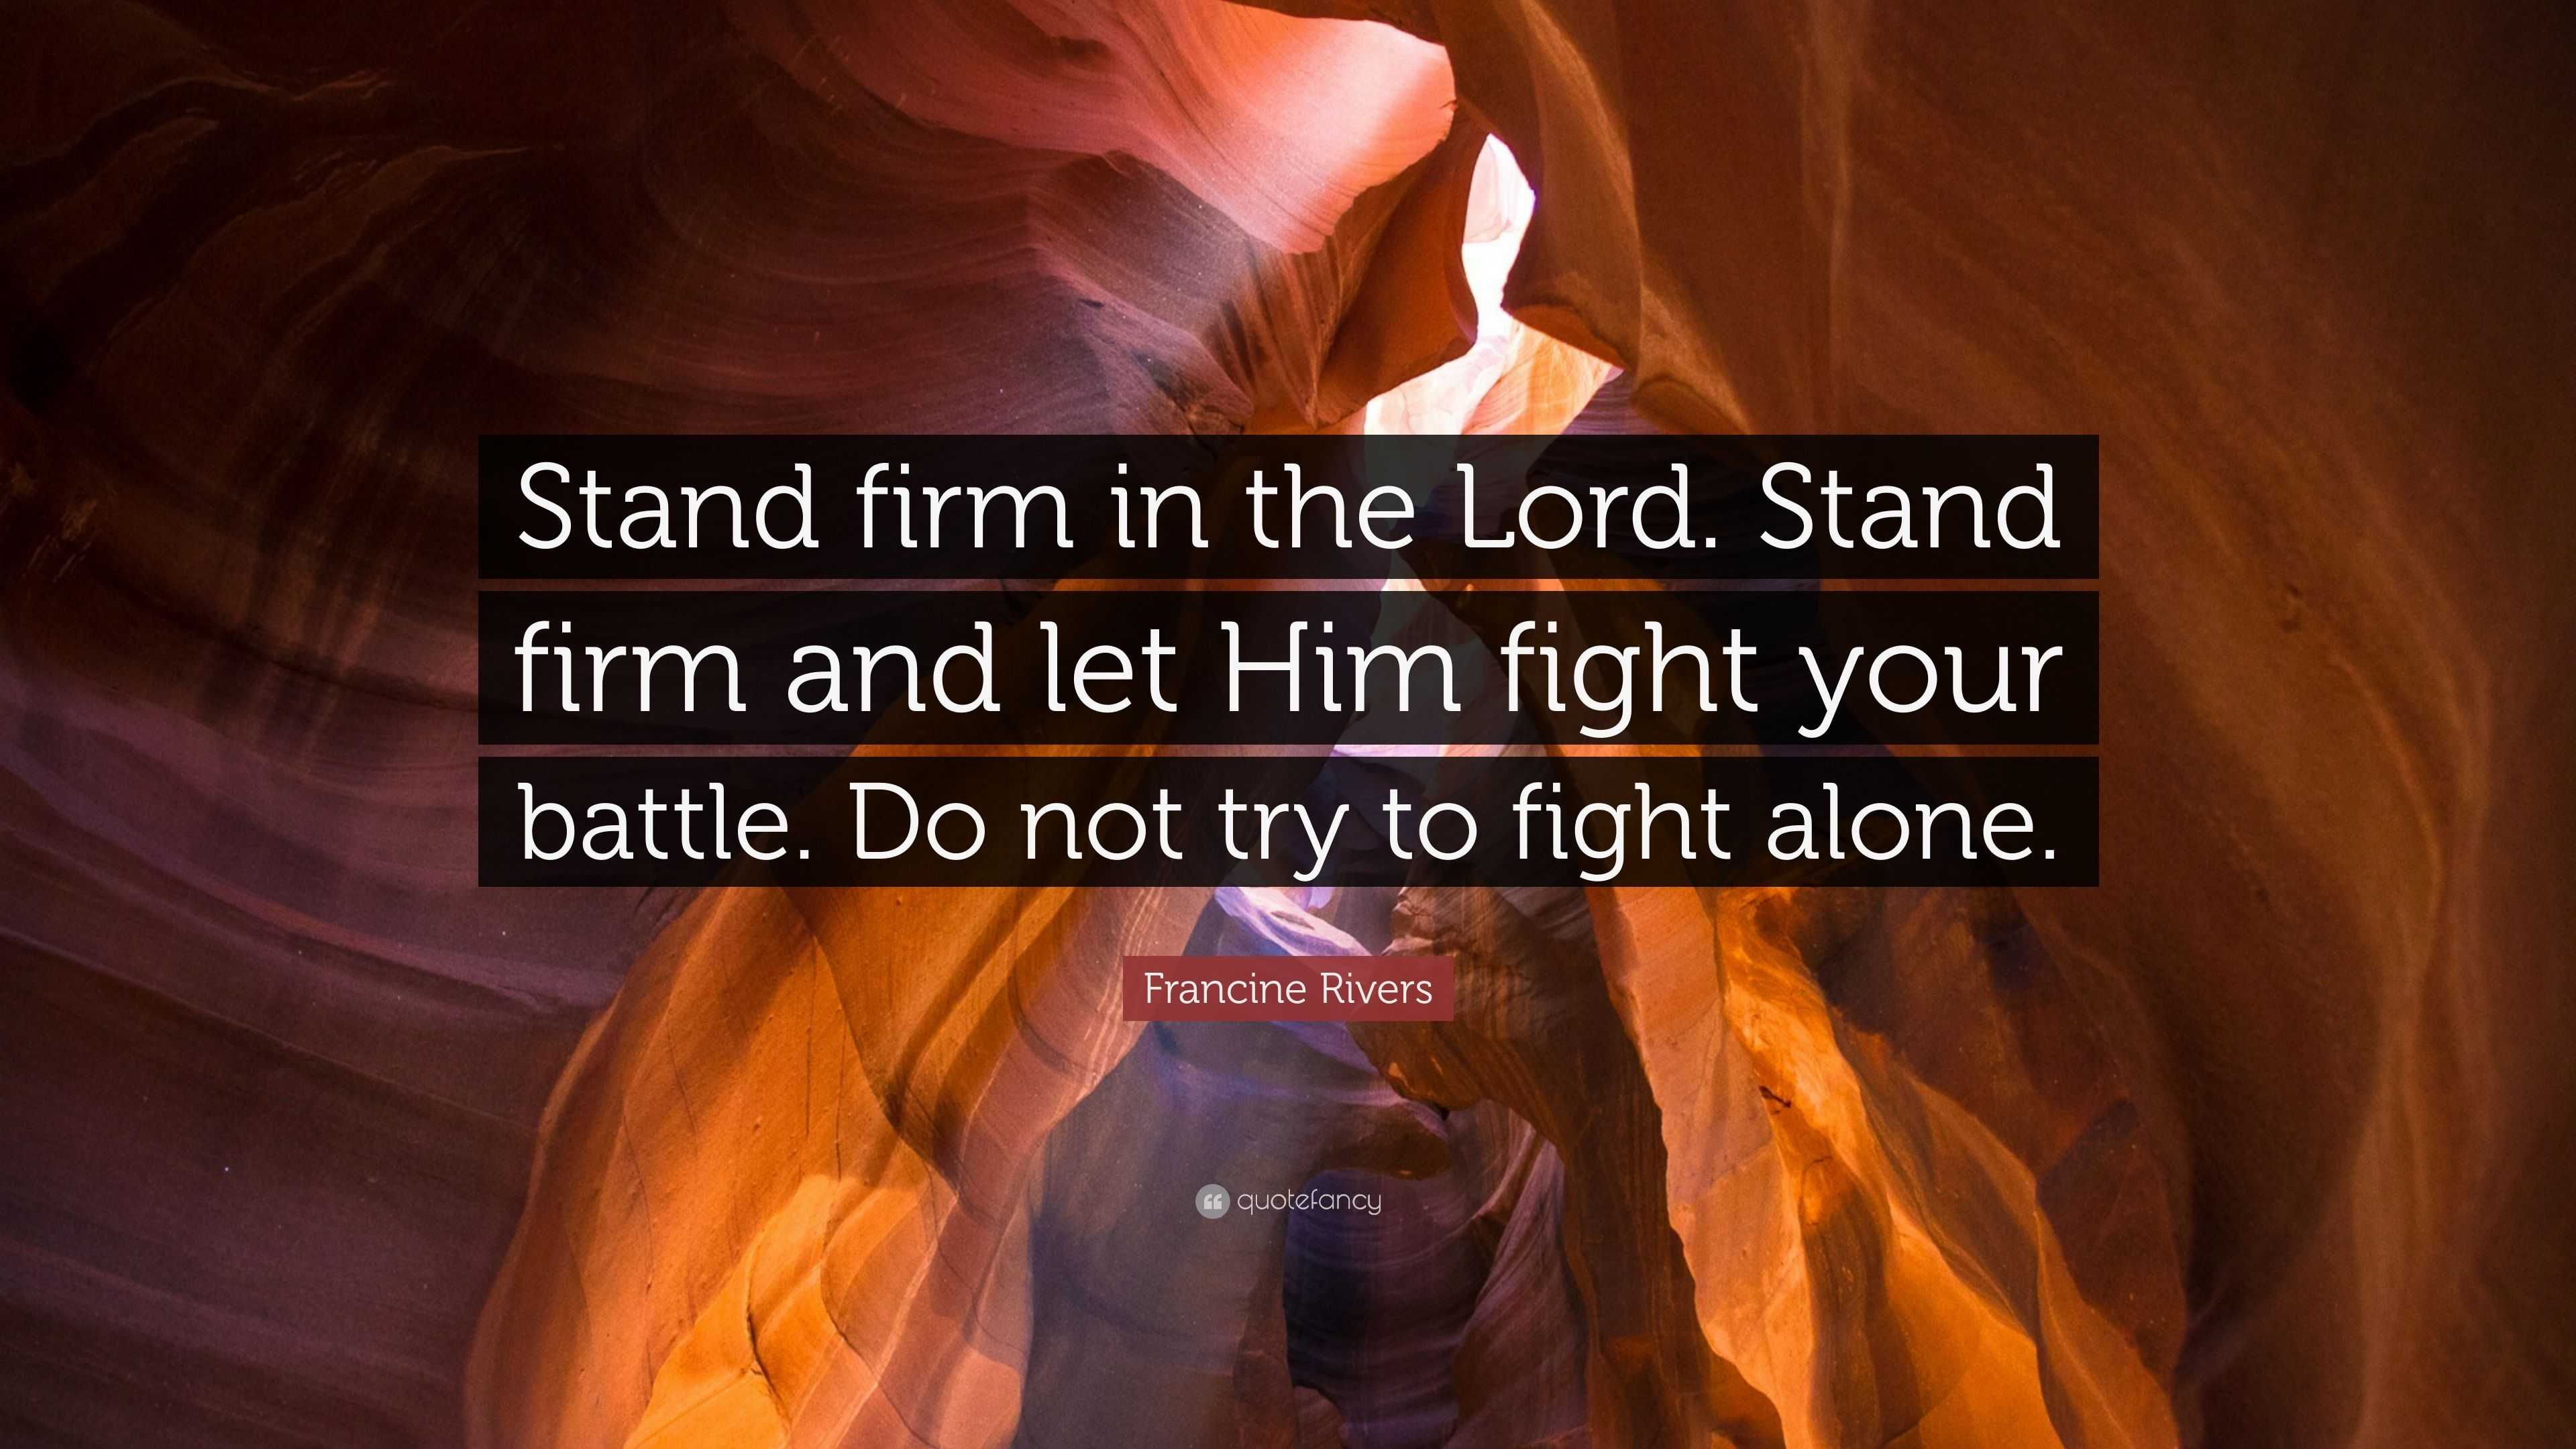 Francine Rivers Quote: "Stand firm in the Lord. Stand firm and let Him fight your battle. Do not ...